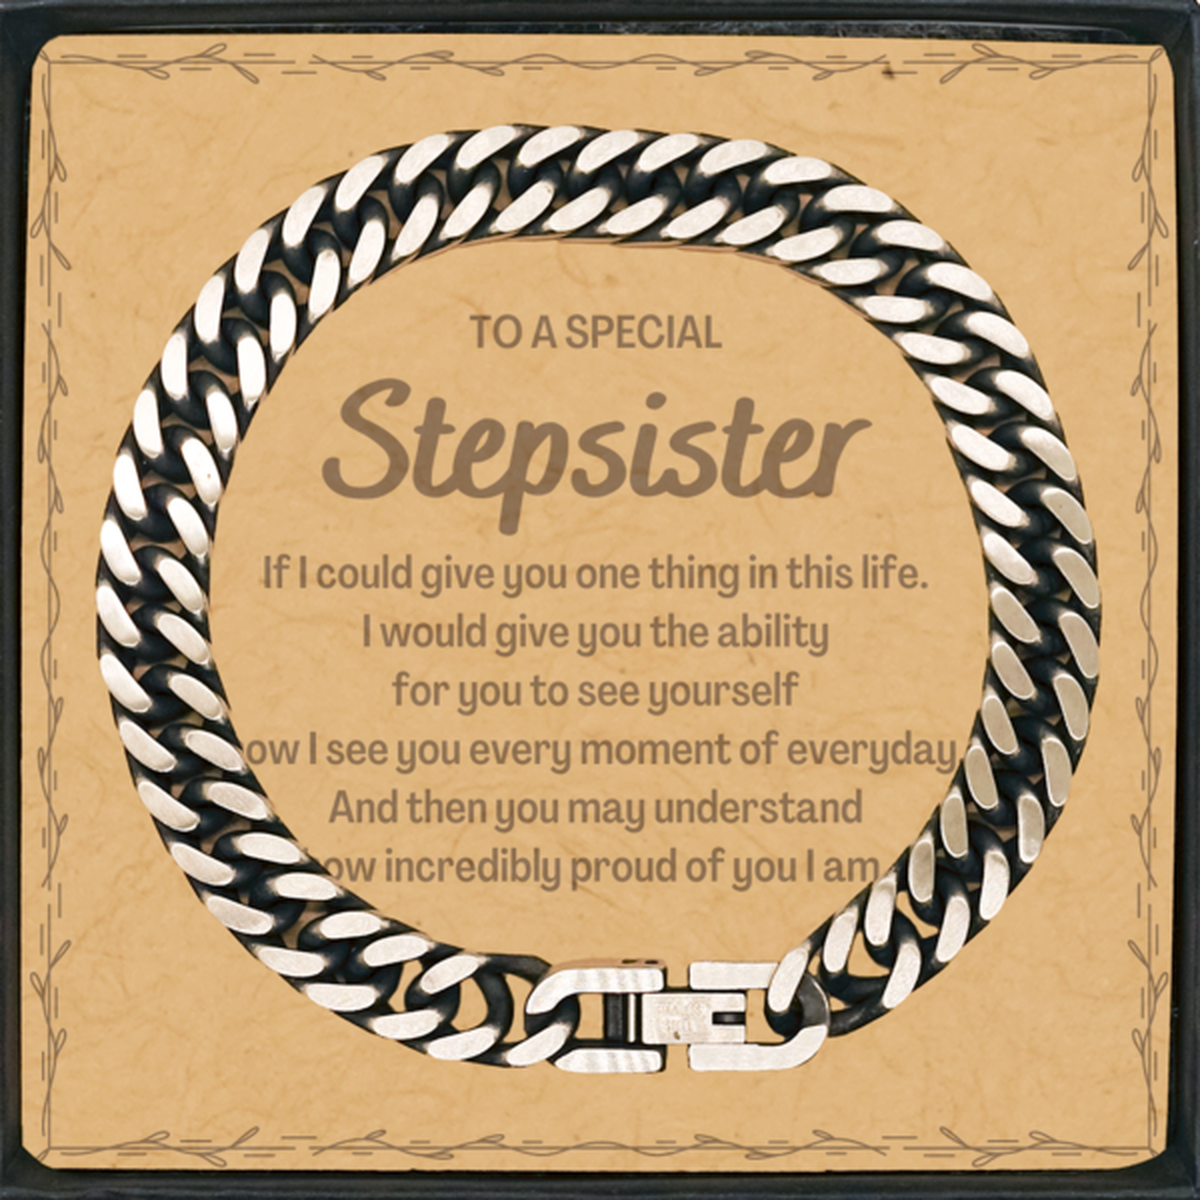 To My Stepsister Cuban Link Chain Bracelet, Gifts For Stepsister Message Card, Inspirational Gifts for Christmas Birthday, Epic Gifts for Stepsister To A Special Stepsister how incredibly proud of you I am